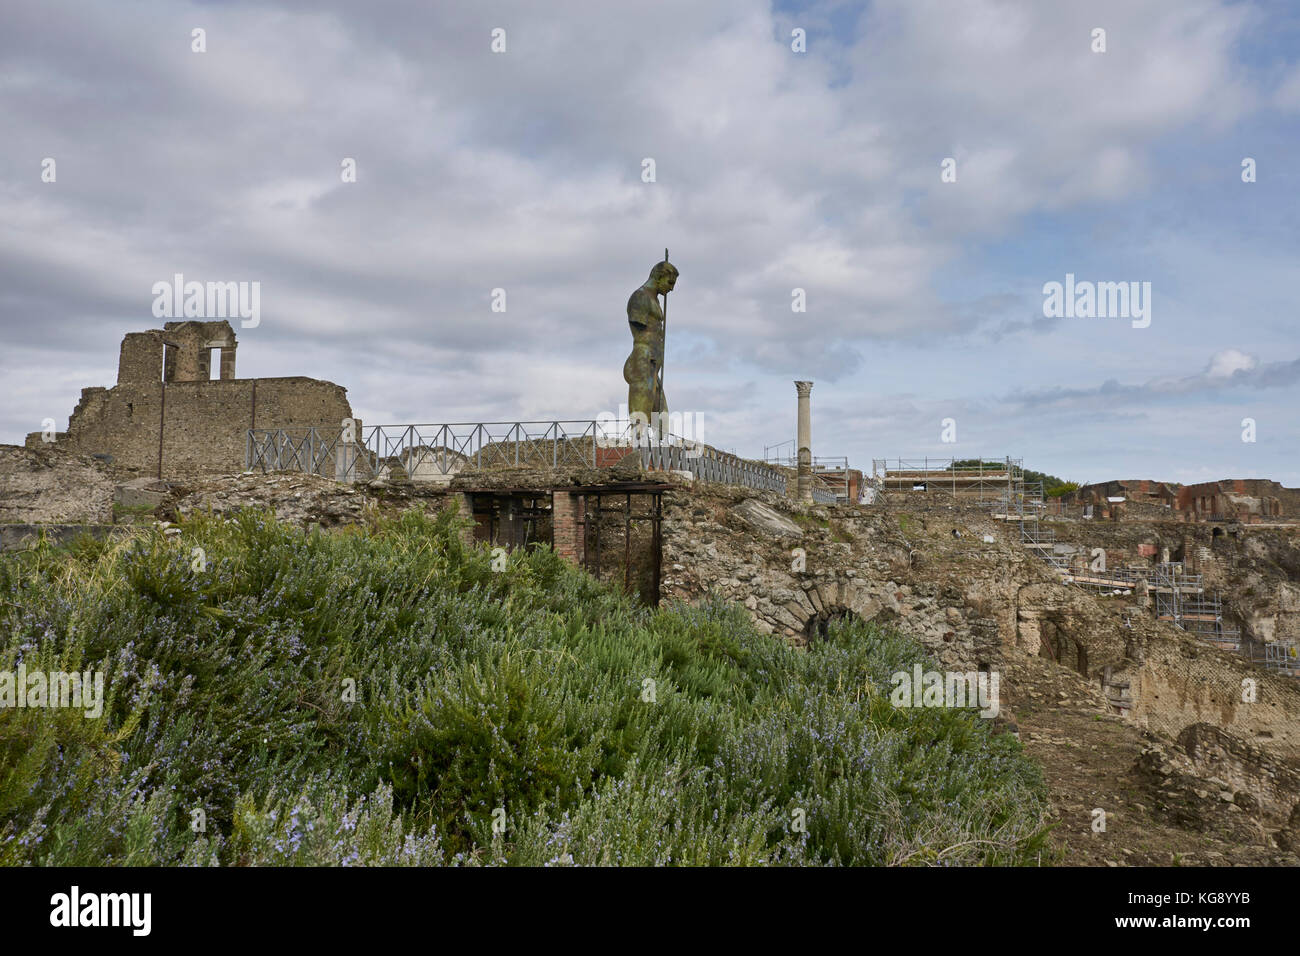 Pompeii ruins exhibited after archaeological excavations. Modern sculpture by the sculptor Igor Mitoraj adjacent to temple ruins. Stock Photo